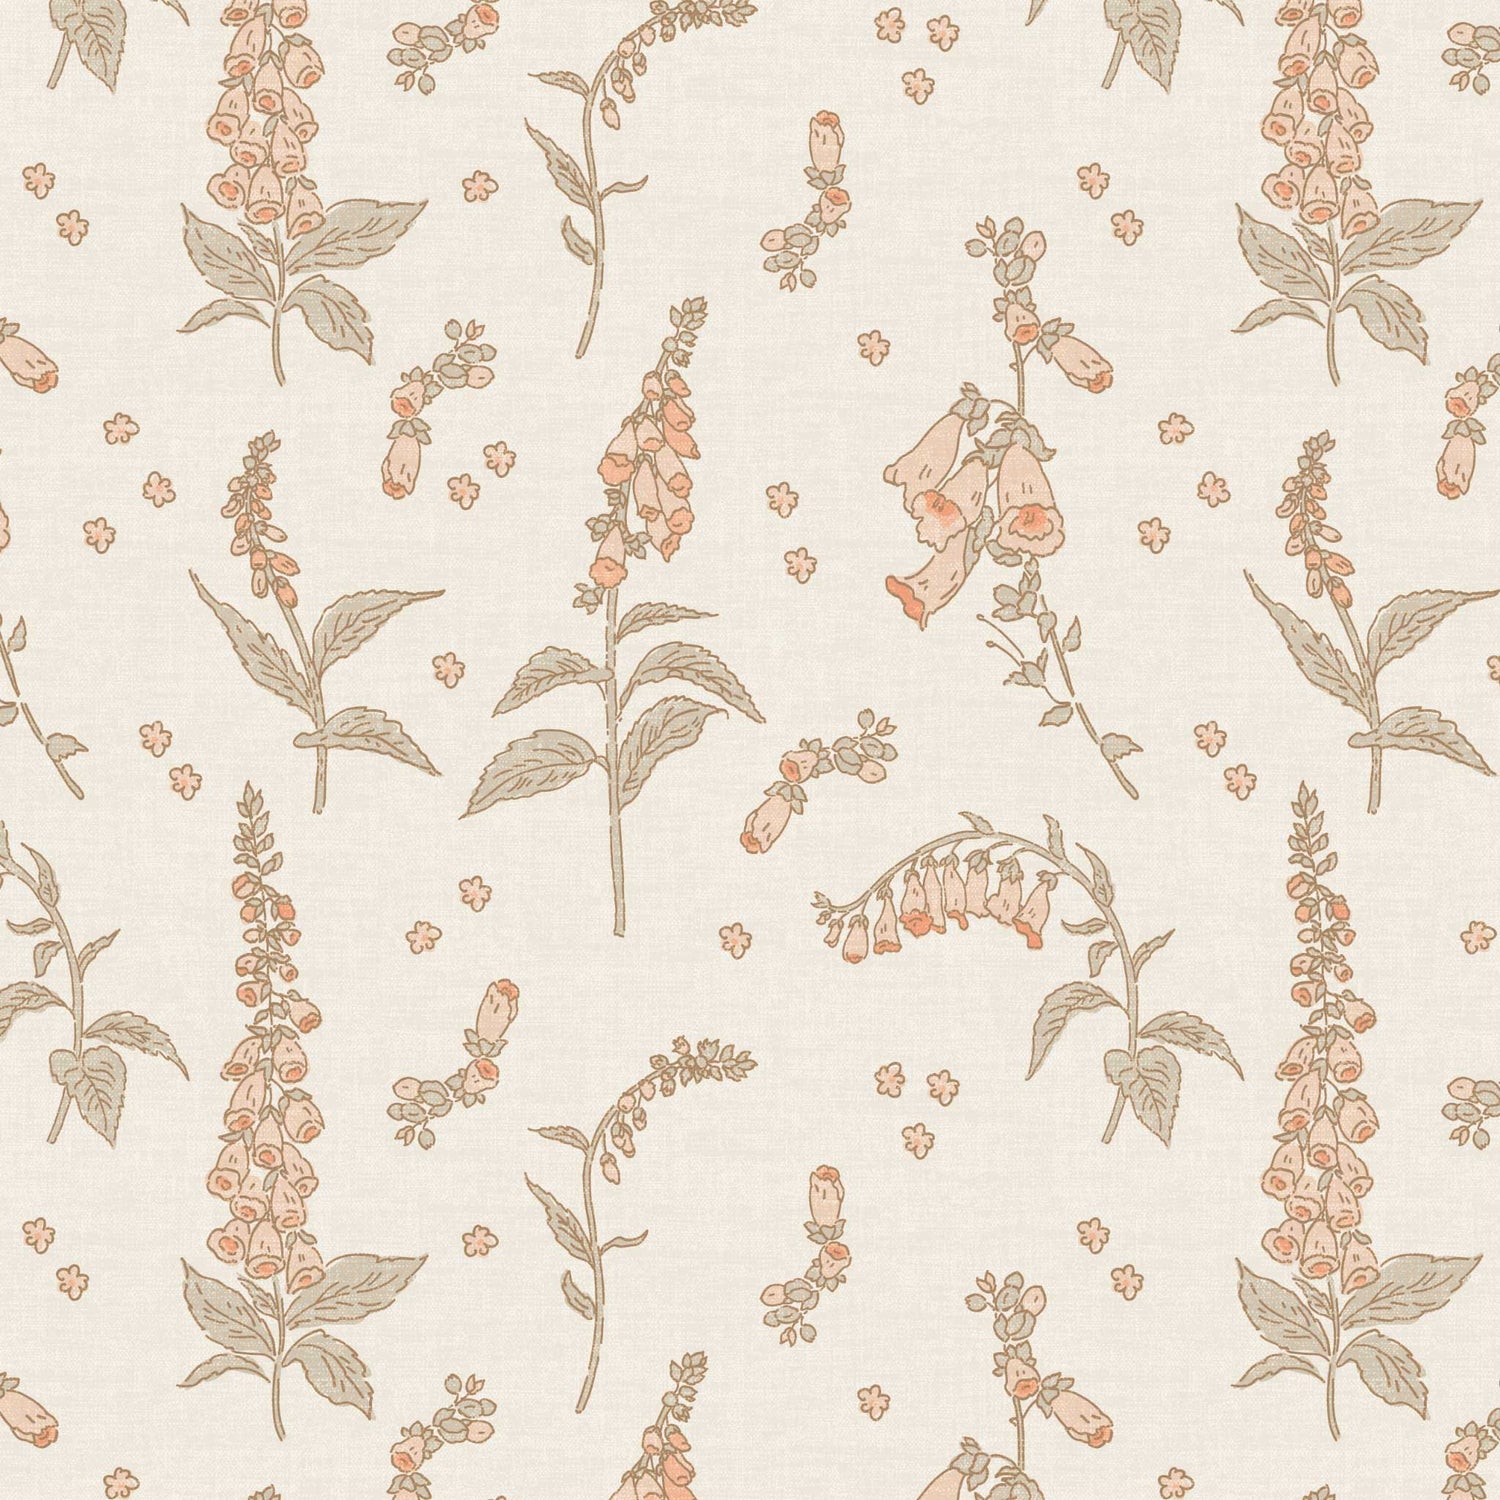 Its delicate botanical design will bring a touch of feminine charm & character to your walls. A truly stunning wallpaper for any room that needs a splash of nature! So pretty in a nursery or delicate space.